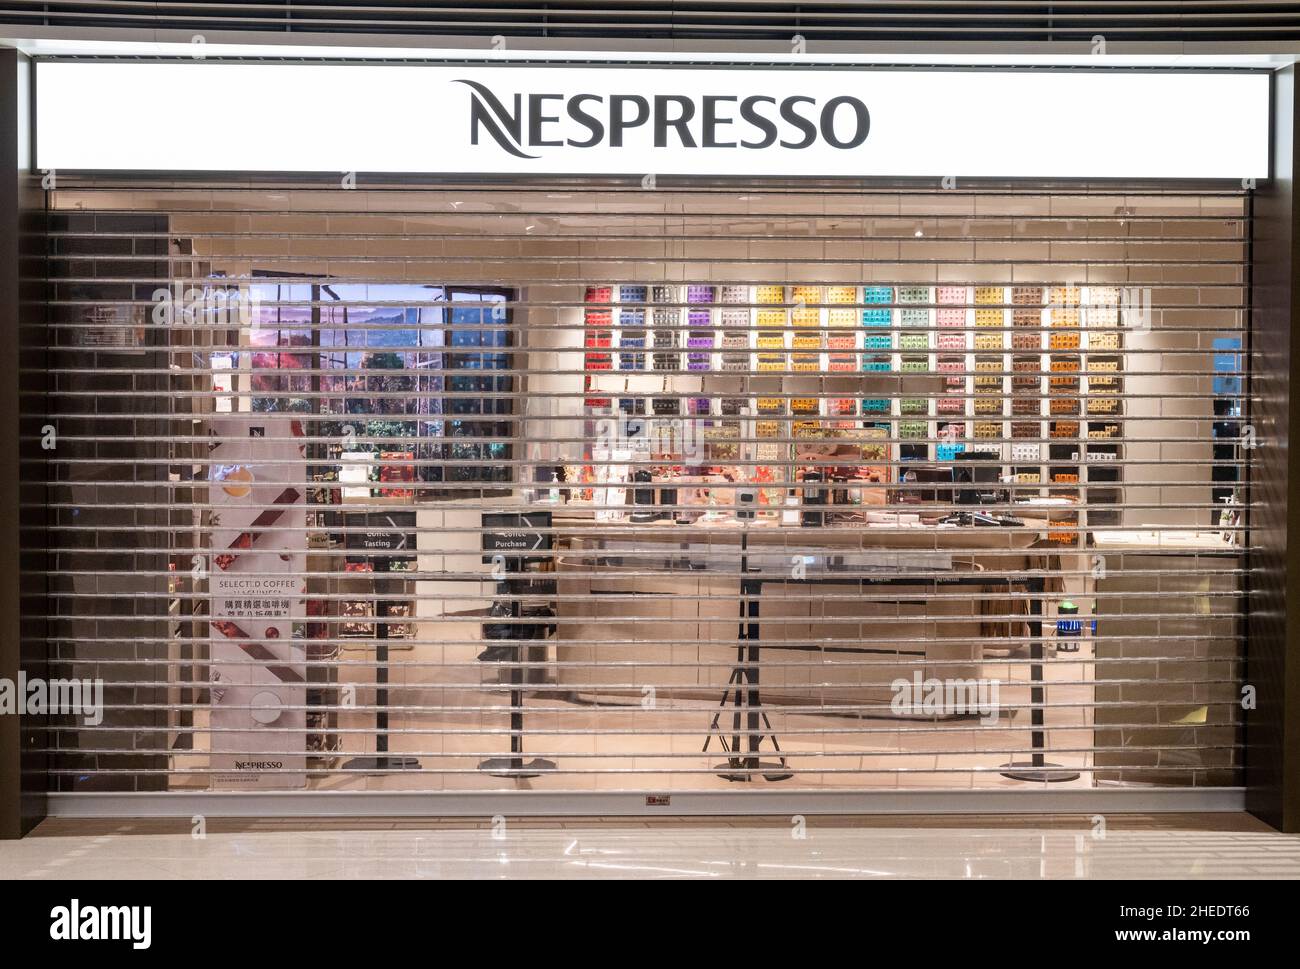 Page 2 - Nespresso Logo High Resolution Stock Photography and Images - Alamy